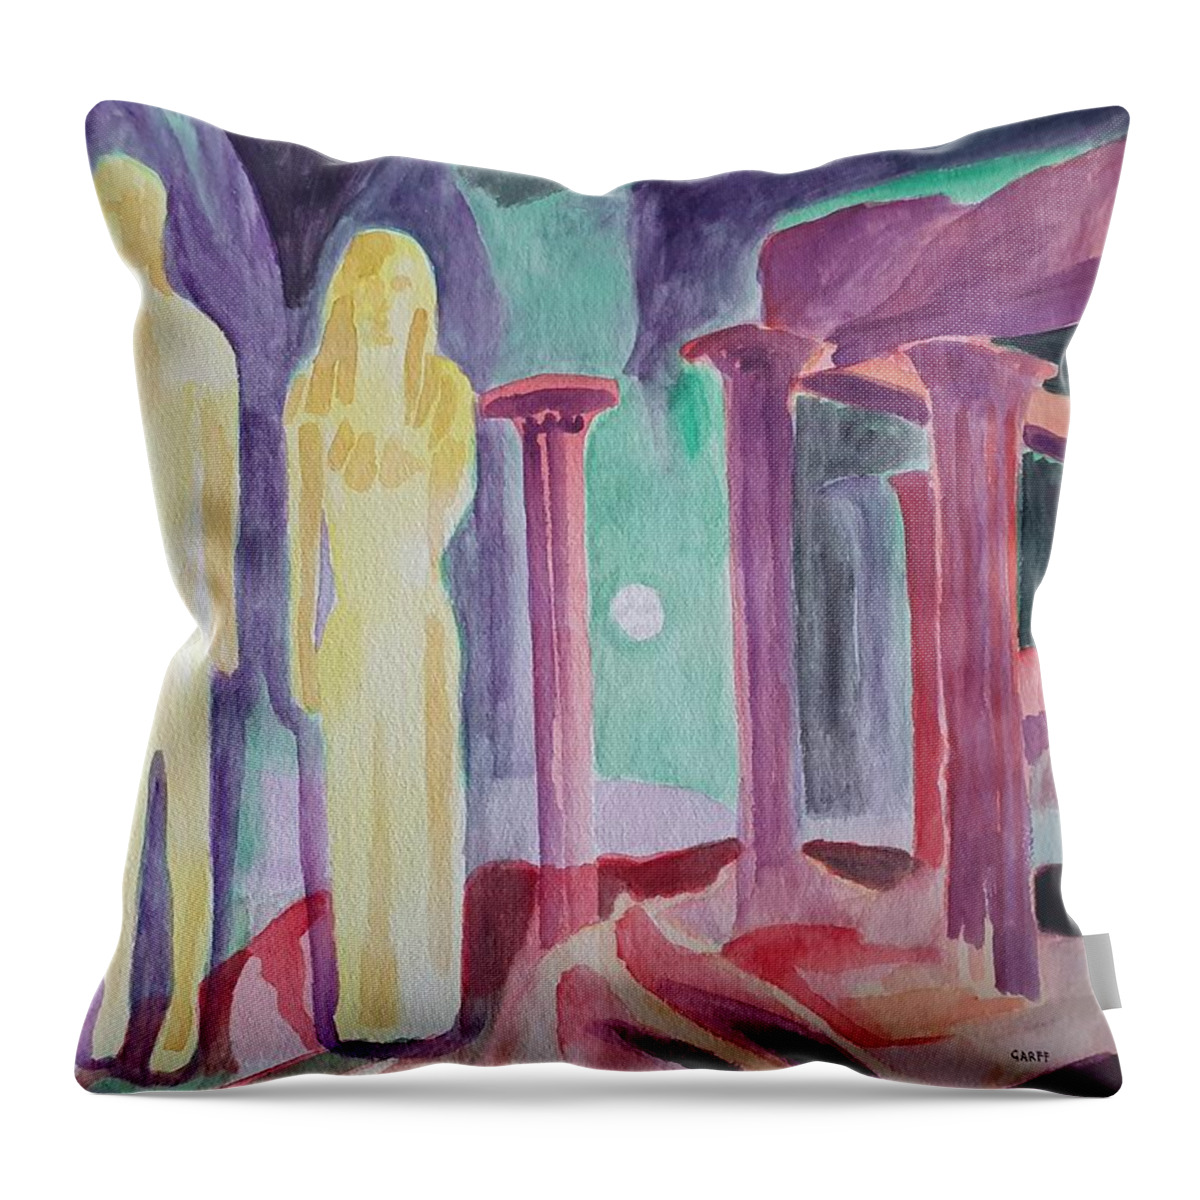 Sculpture Throw Pillow featuring the painting Eternal Union by Enrico Garff